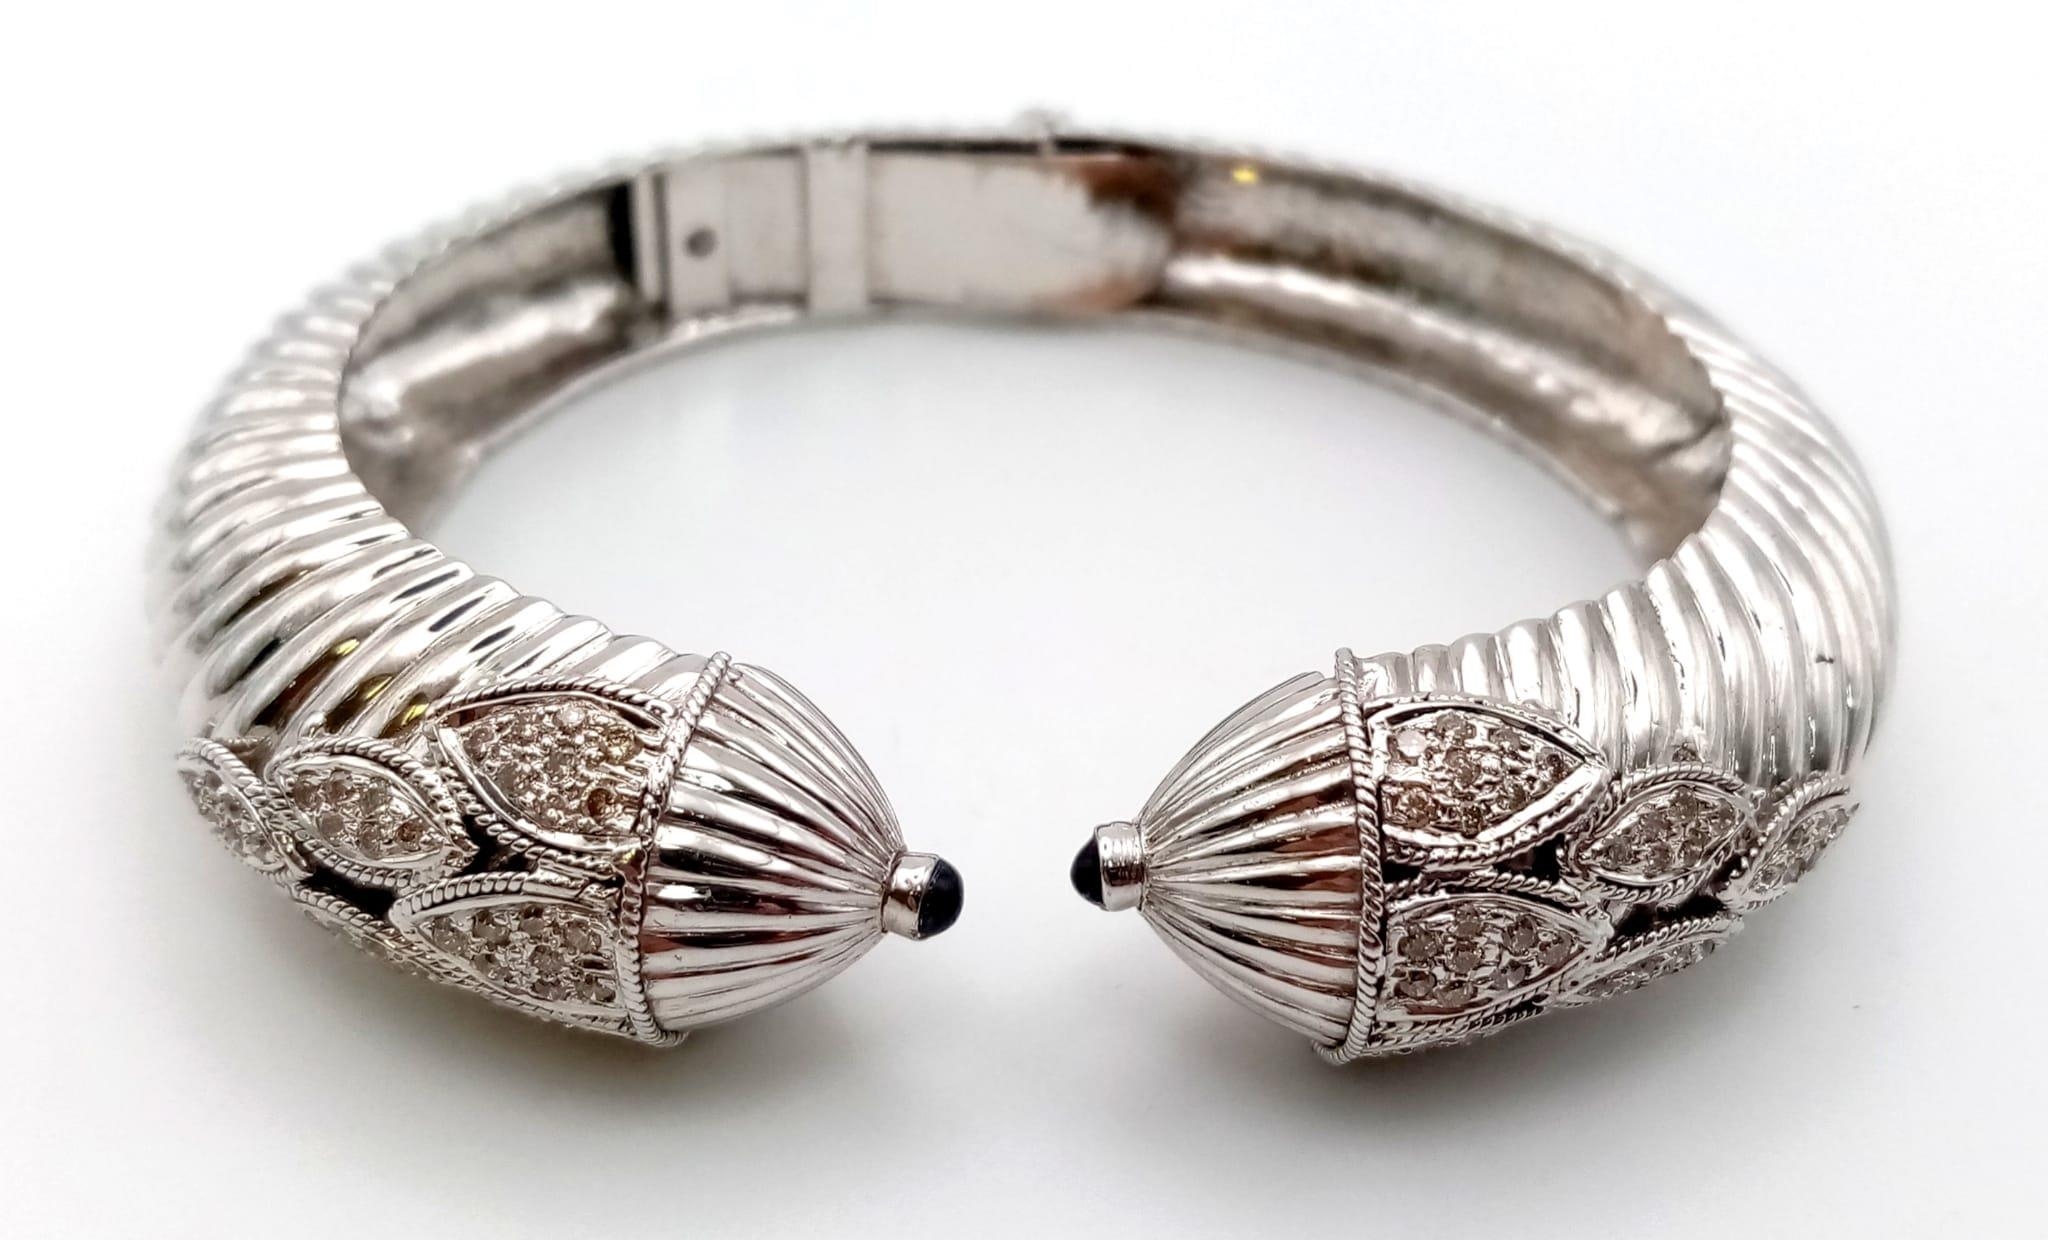 A 14K WHITE GOLD HINGED DIAMOND BANGLE WITH SAPPHIRE TIPS , BEAUTIFULLY SHAPED AND DESIGNED. 39.6gms